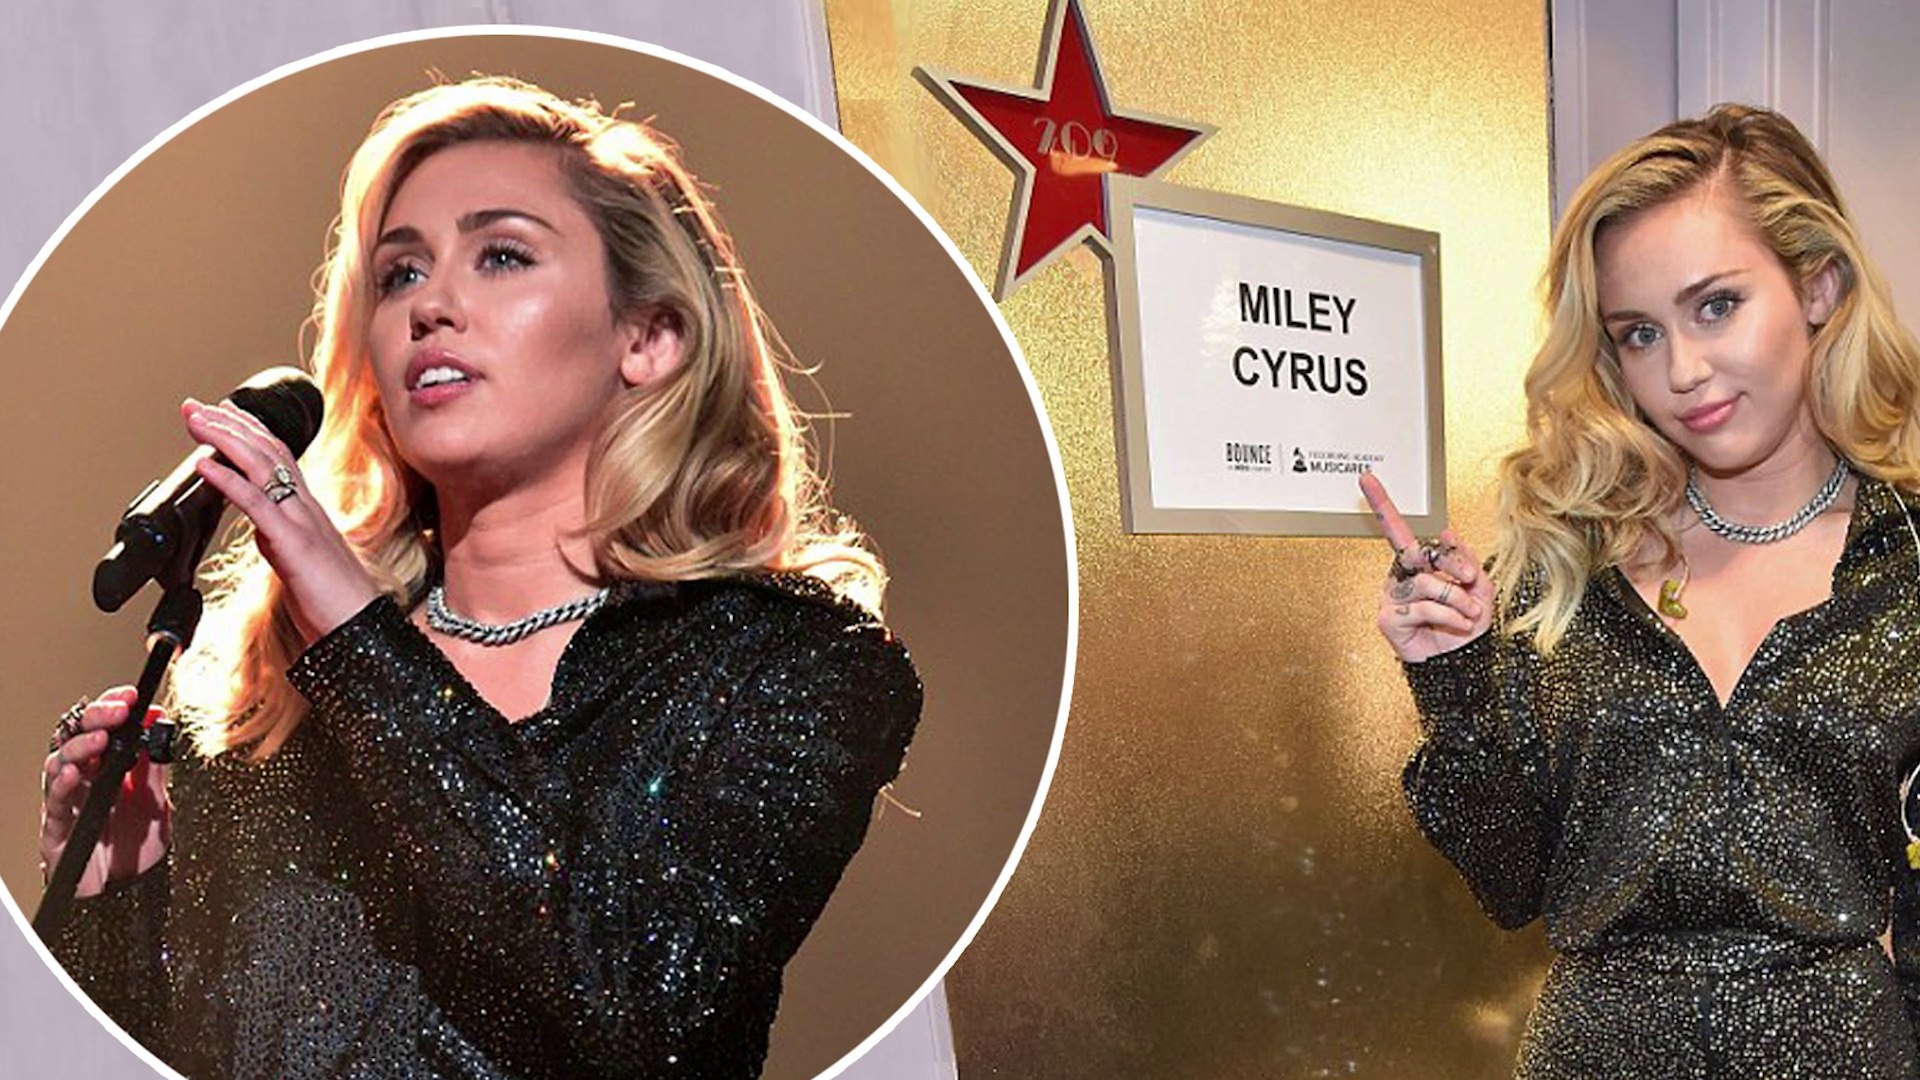 Shining star! Miley Cyrus dazzles in sparkly black jumpsuit for MusiCares honoring Fleetwood Mac.